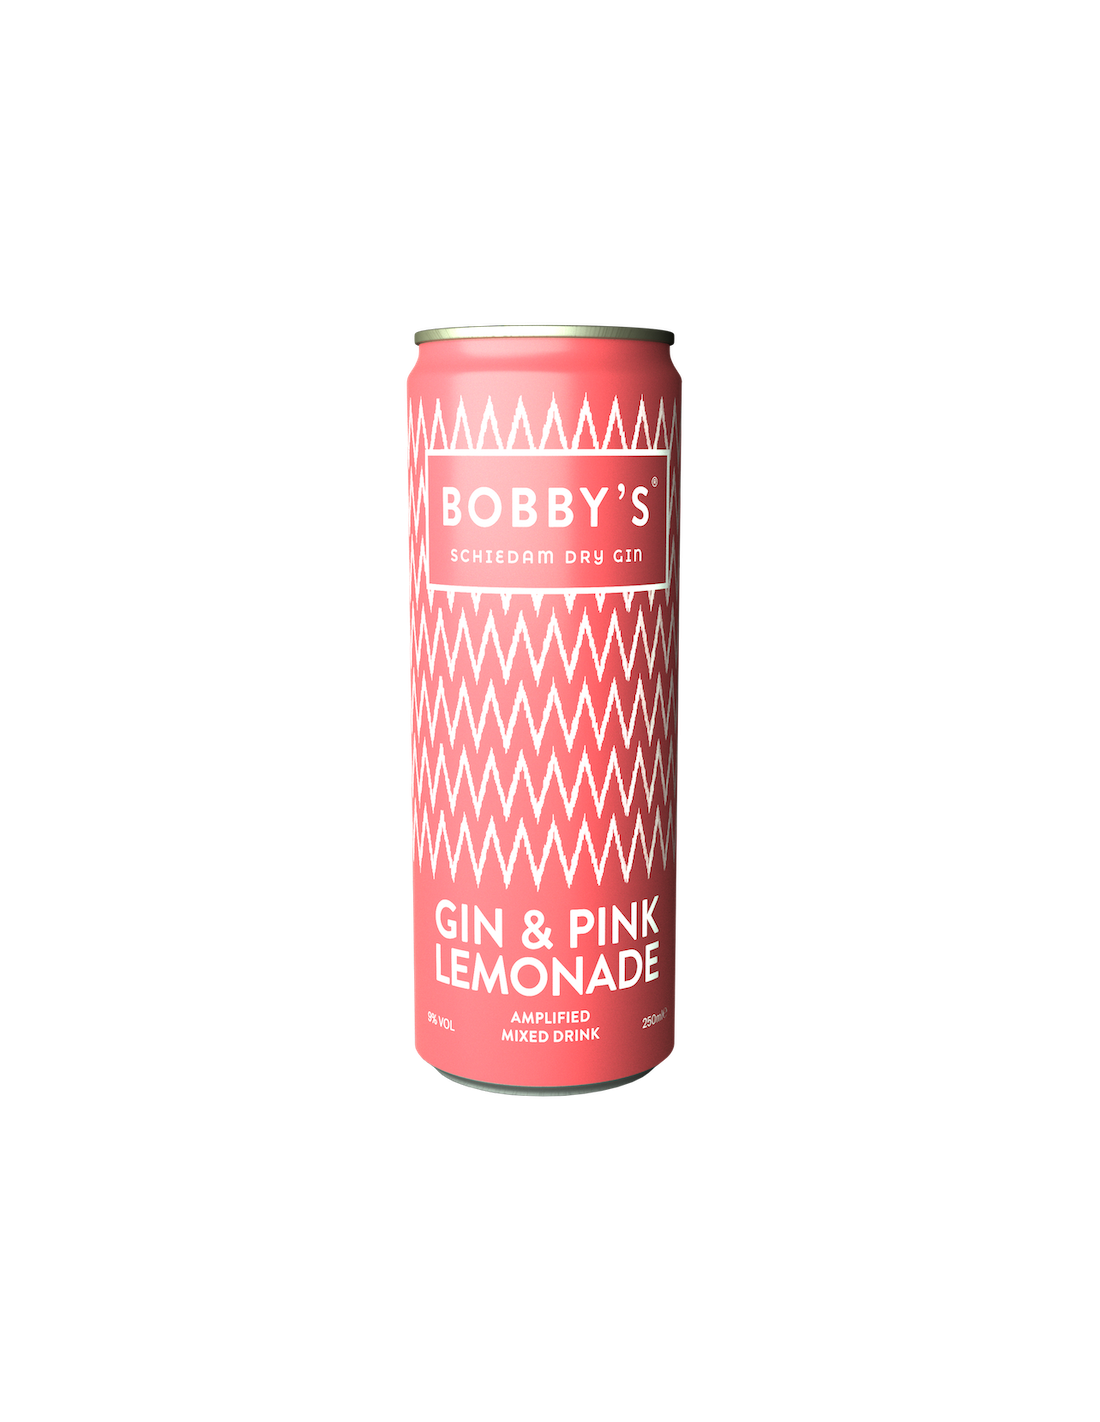 Cocktail Bobby’s Gin & Pink Lemonade, 9% alc., 0.25L alcooldiscount.ro